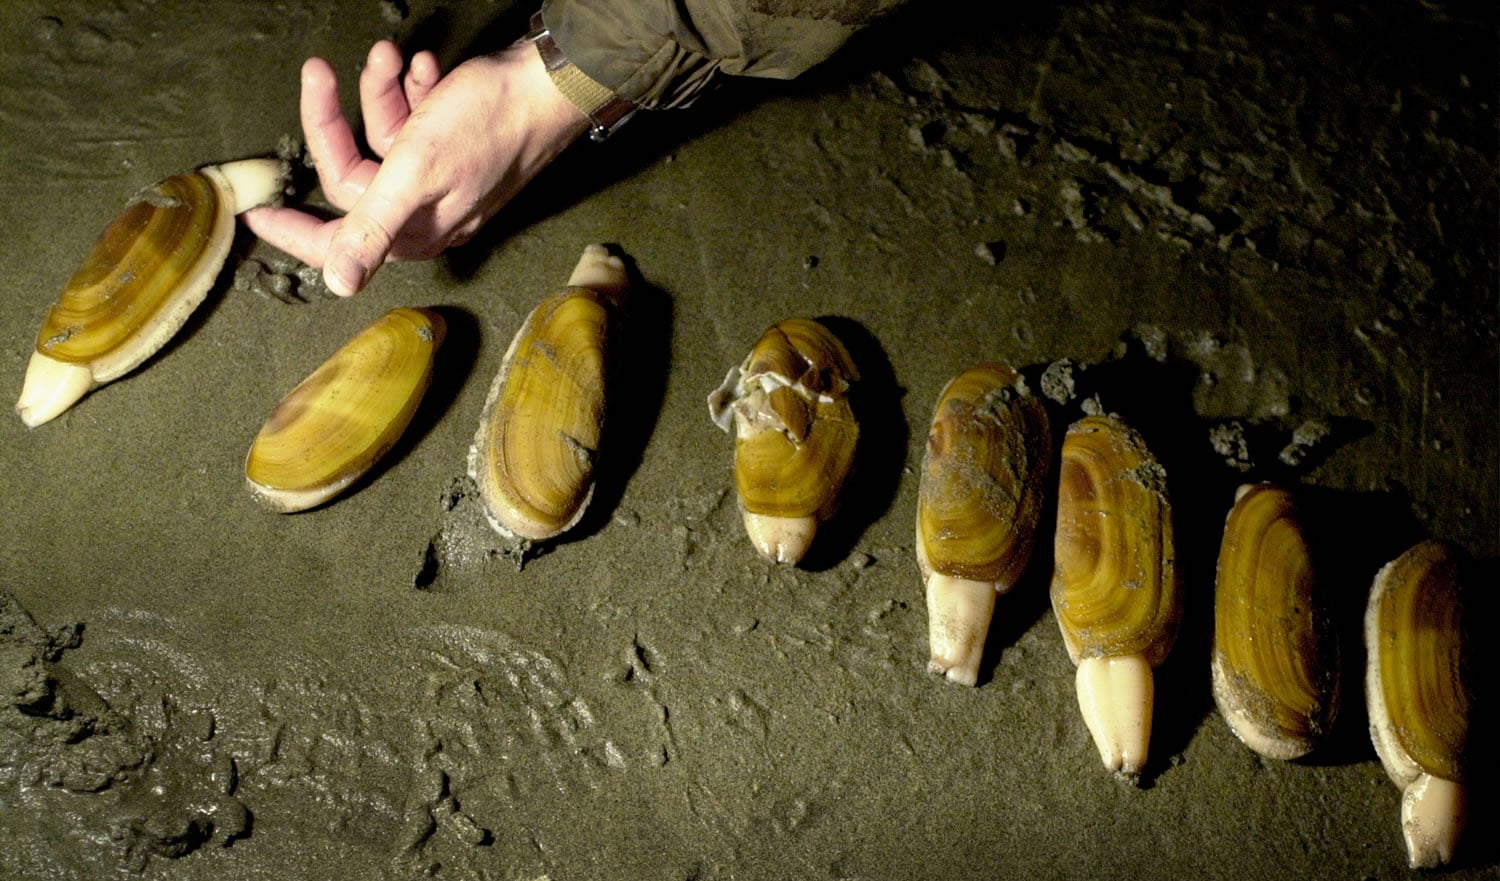 High levels of marine toxins have forced the cancelation of scheduled razor clam digs at Long Beach.